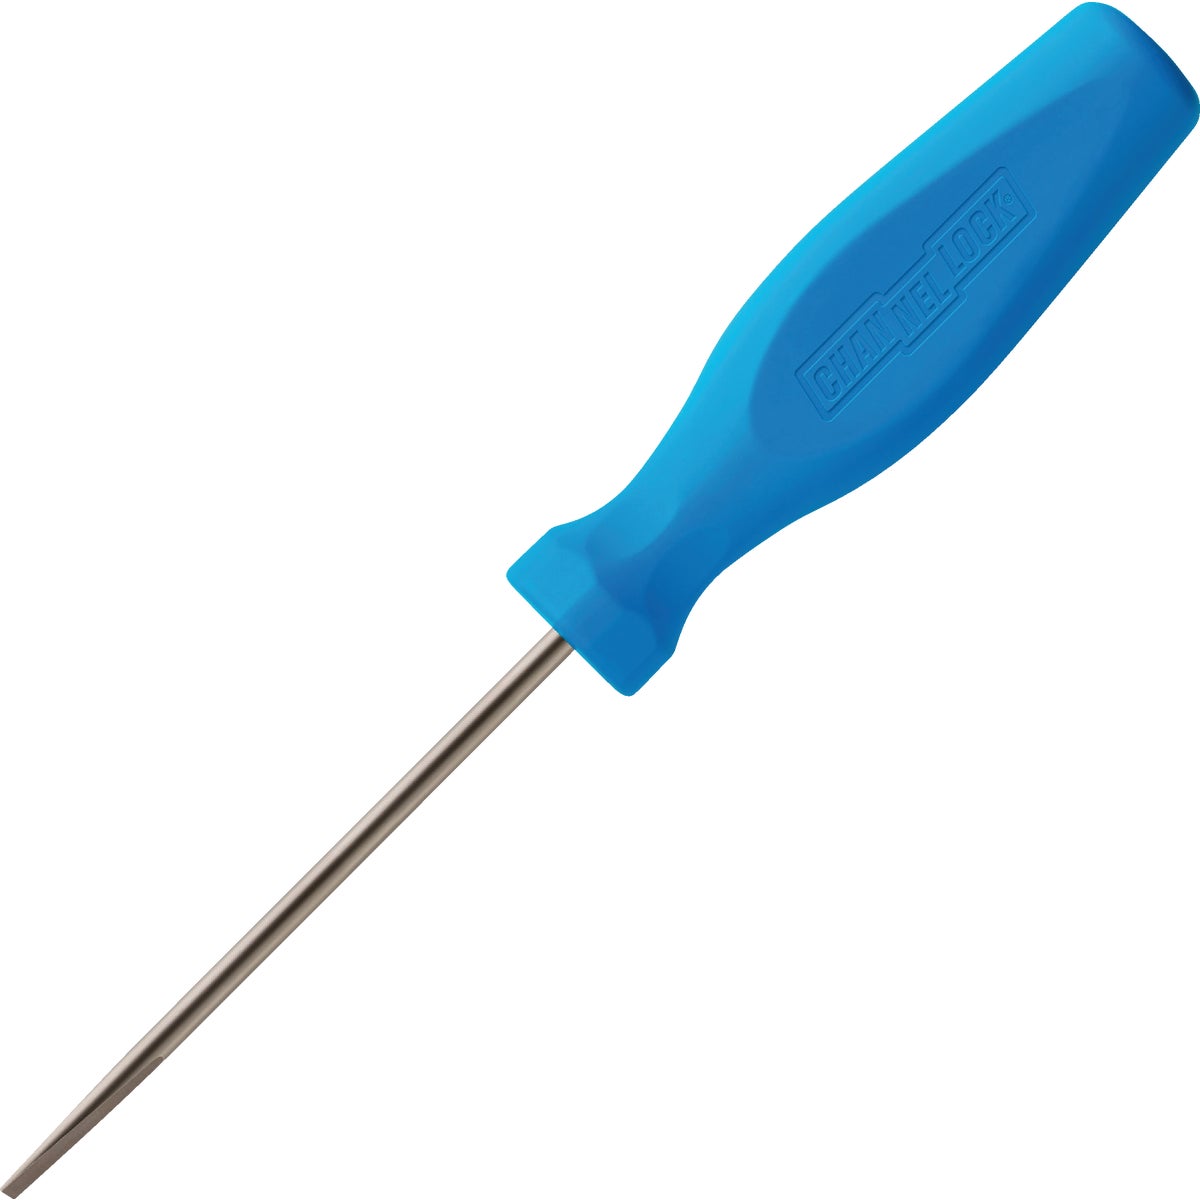 Item 302497, The CHANNELLOCK Professional Slotted Screwdriver offers advanced 